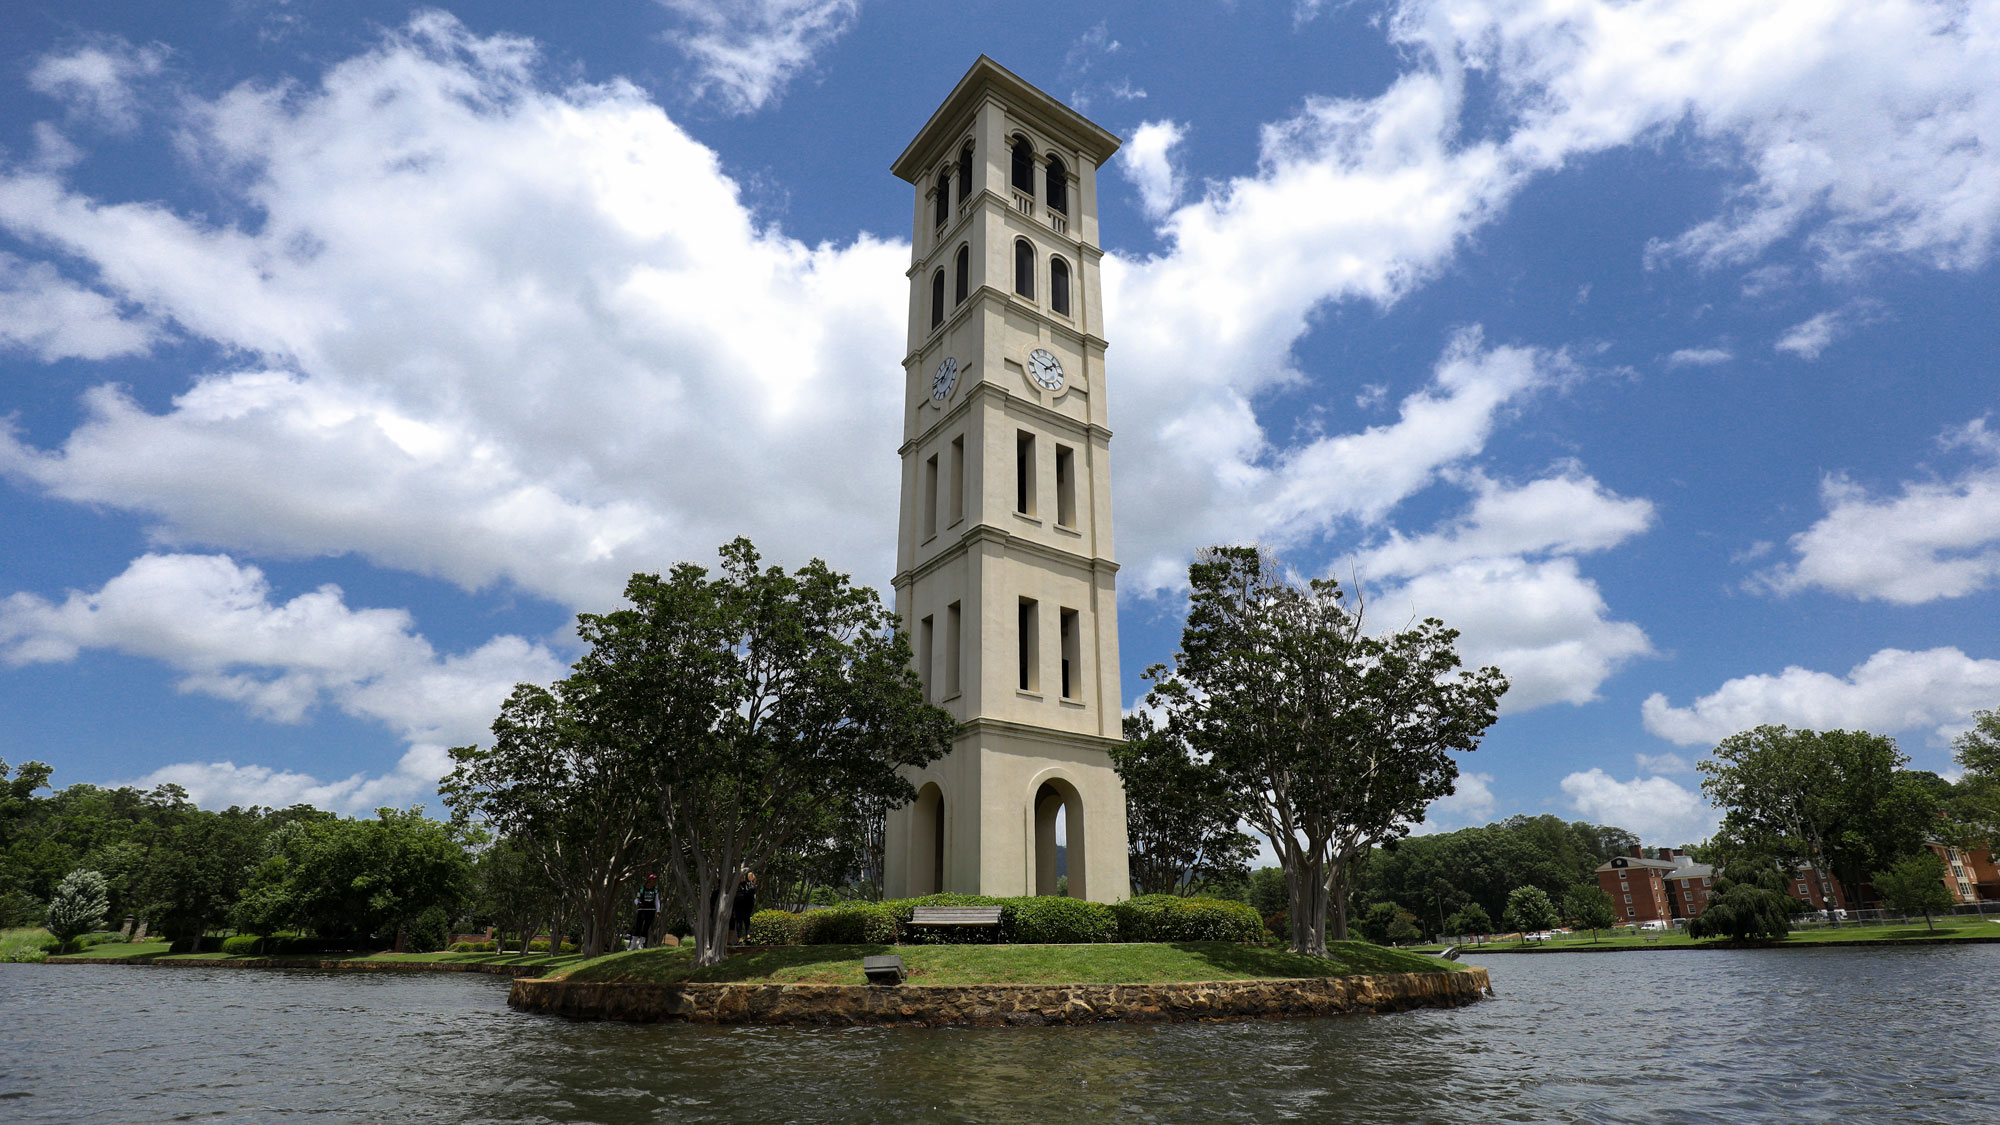 Bell tower pictured in spring